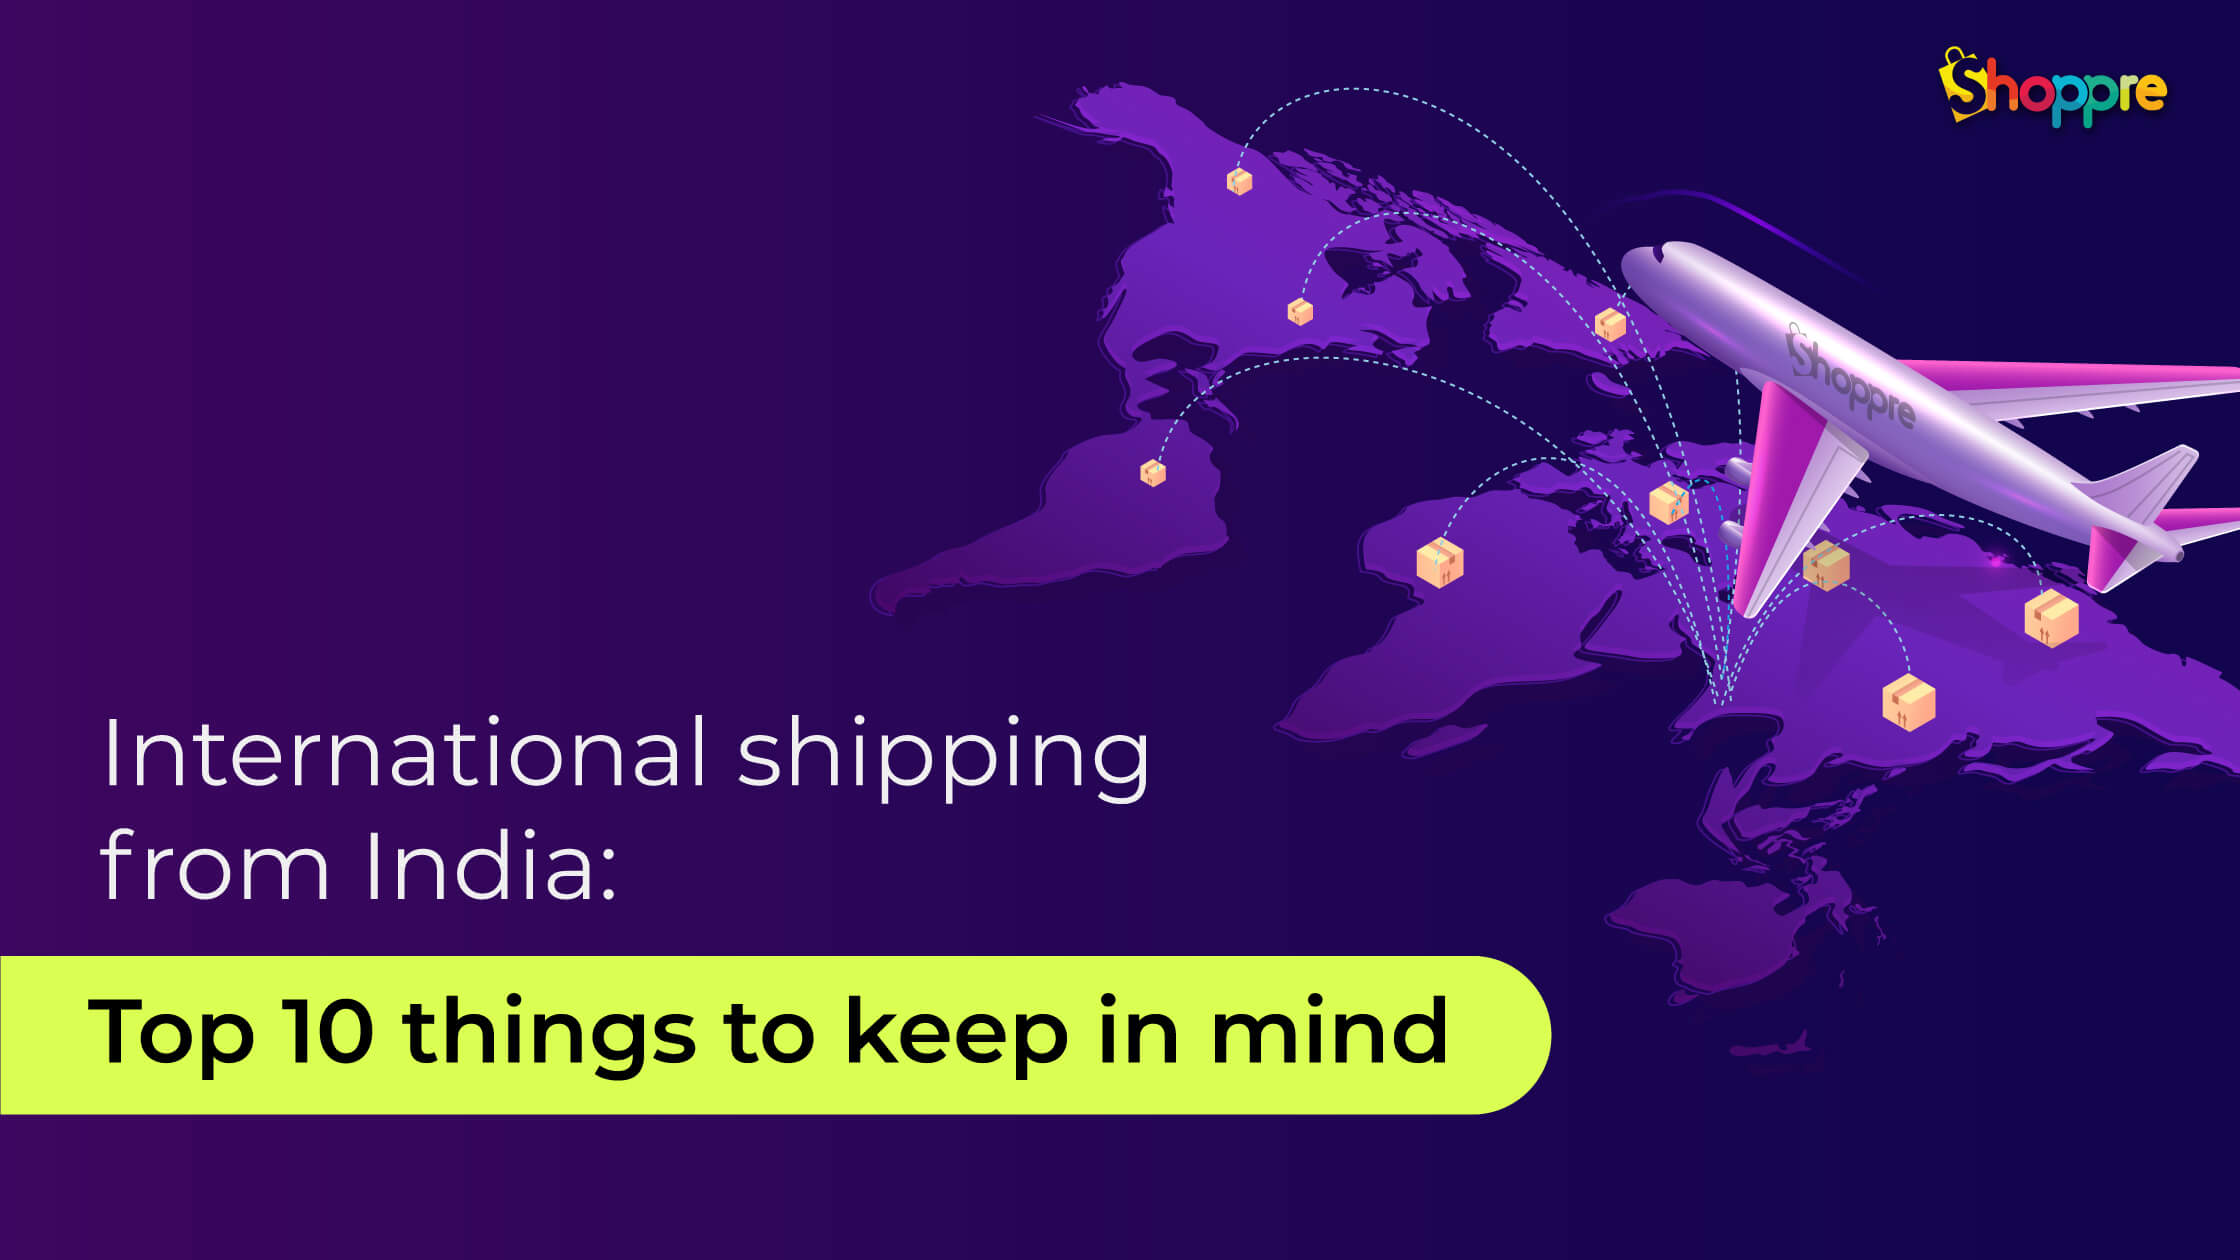 10 rules for shipping internationally